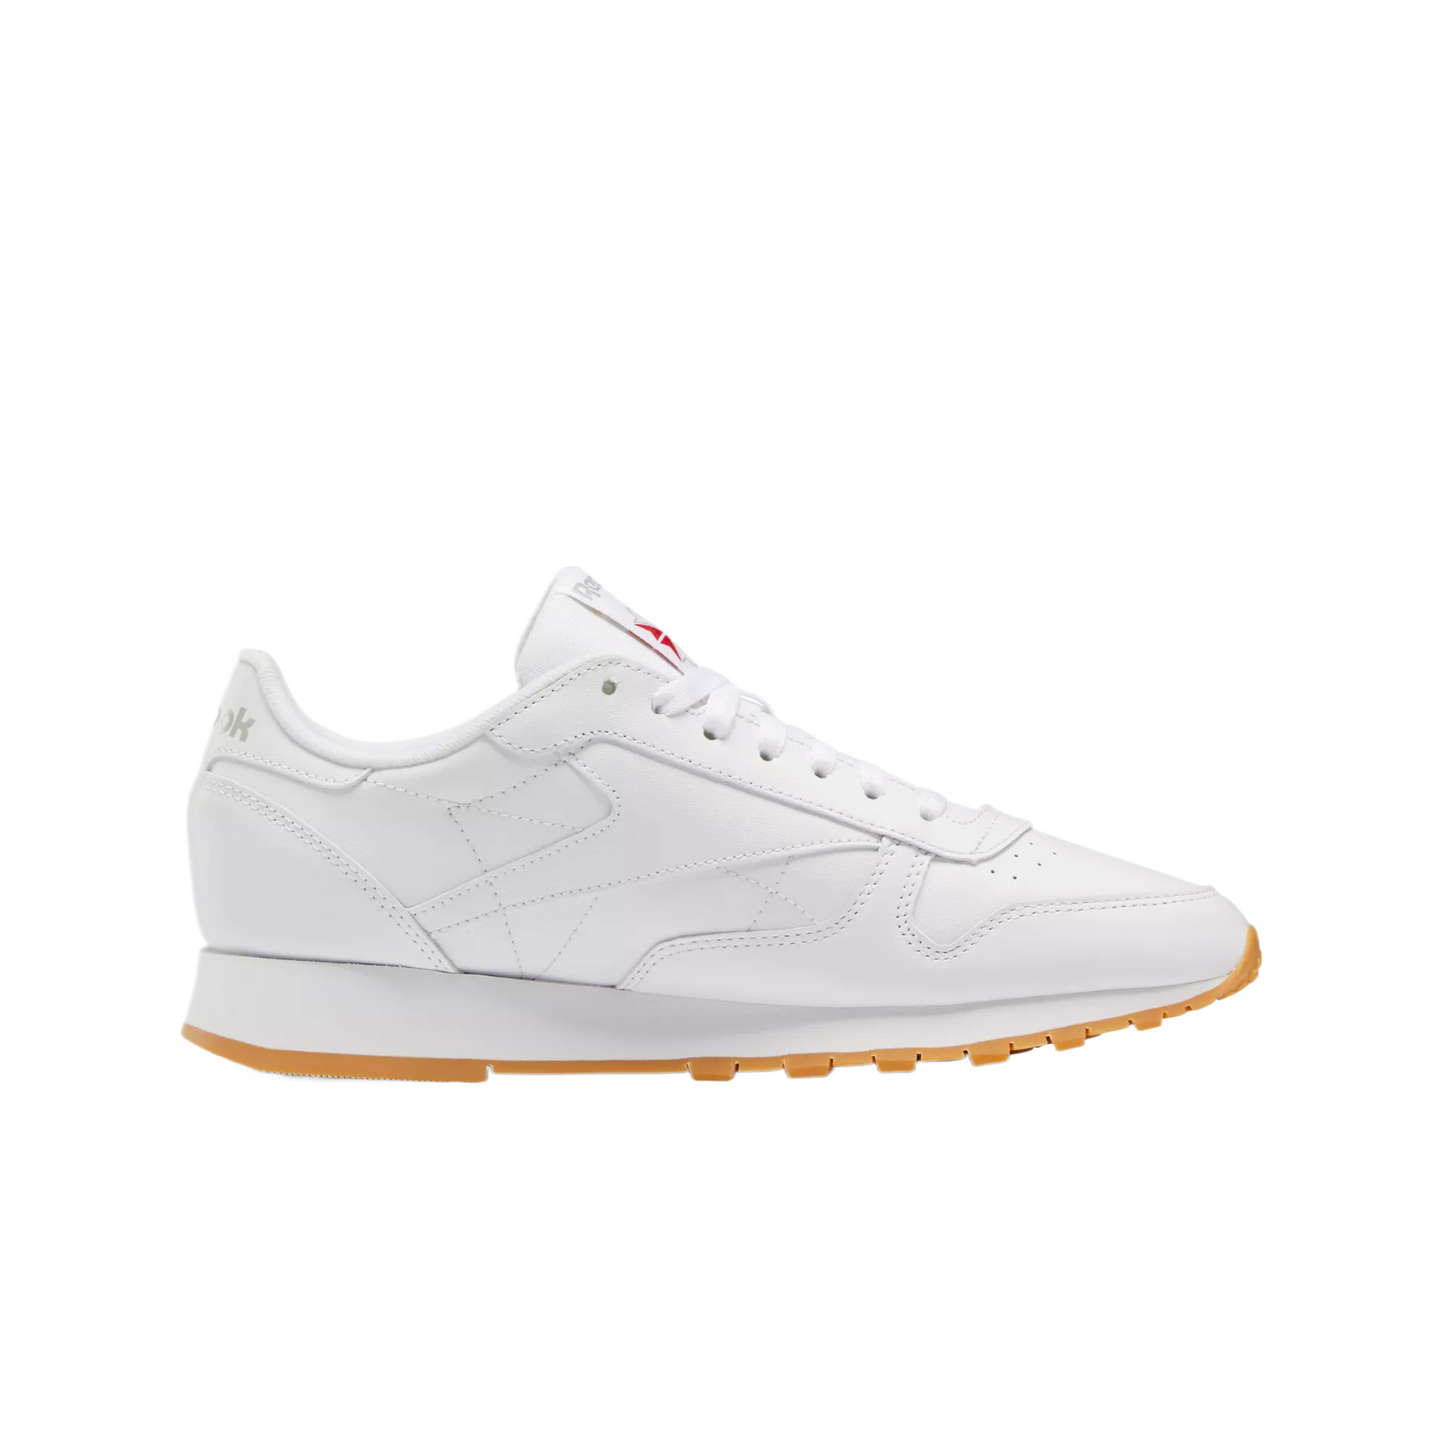 Reebok Adult Unisex Classic Leather Shoes White/Gum 49797 / GY0952